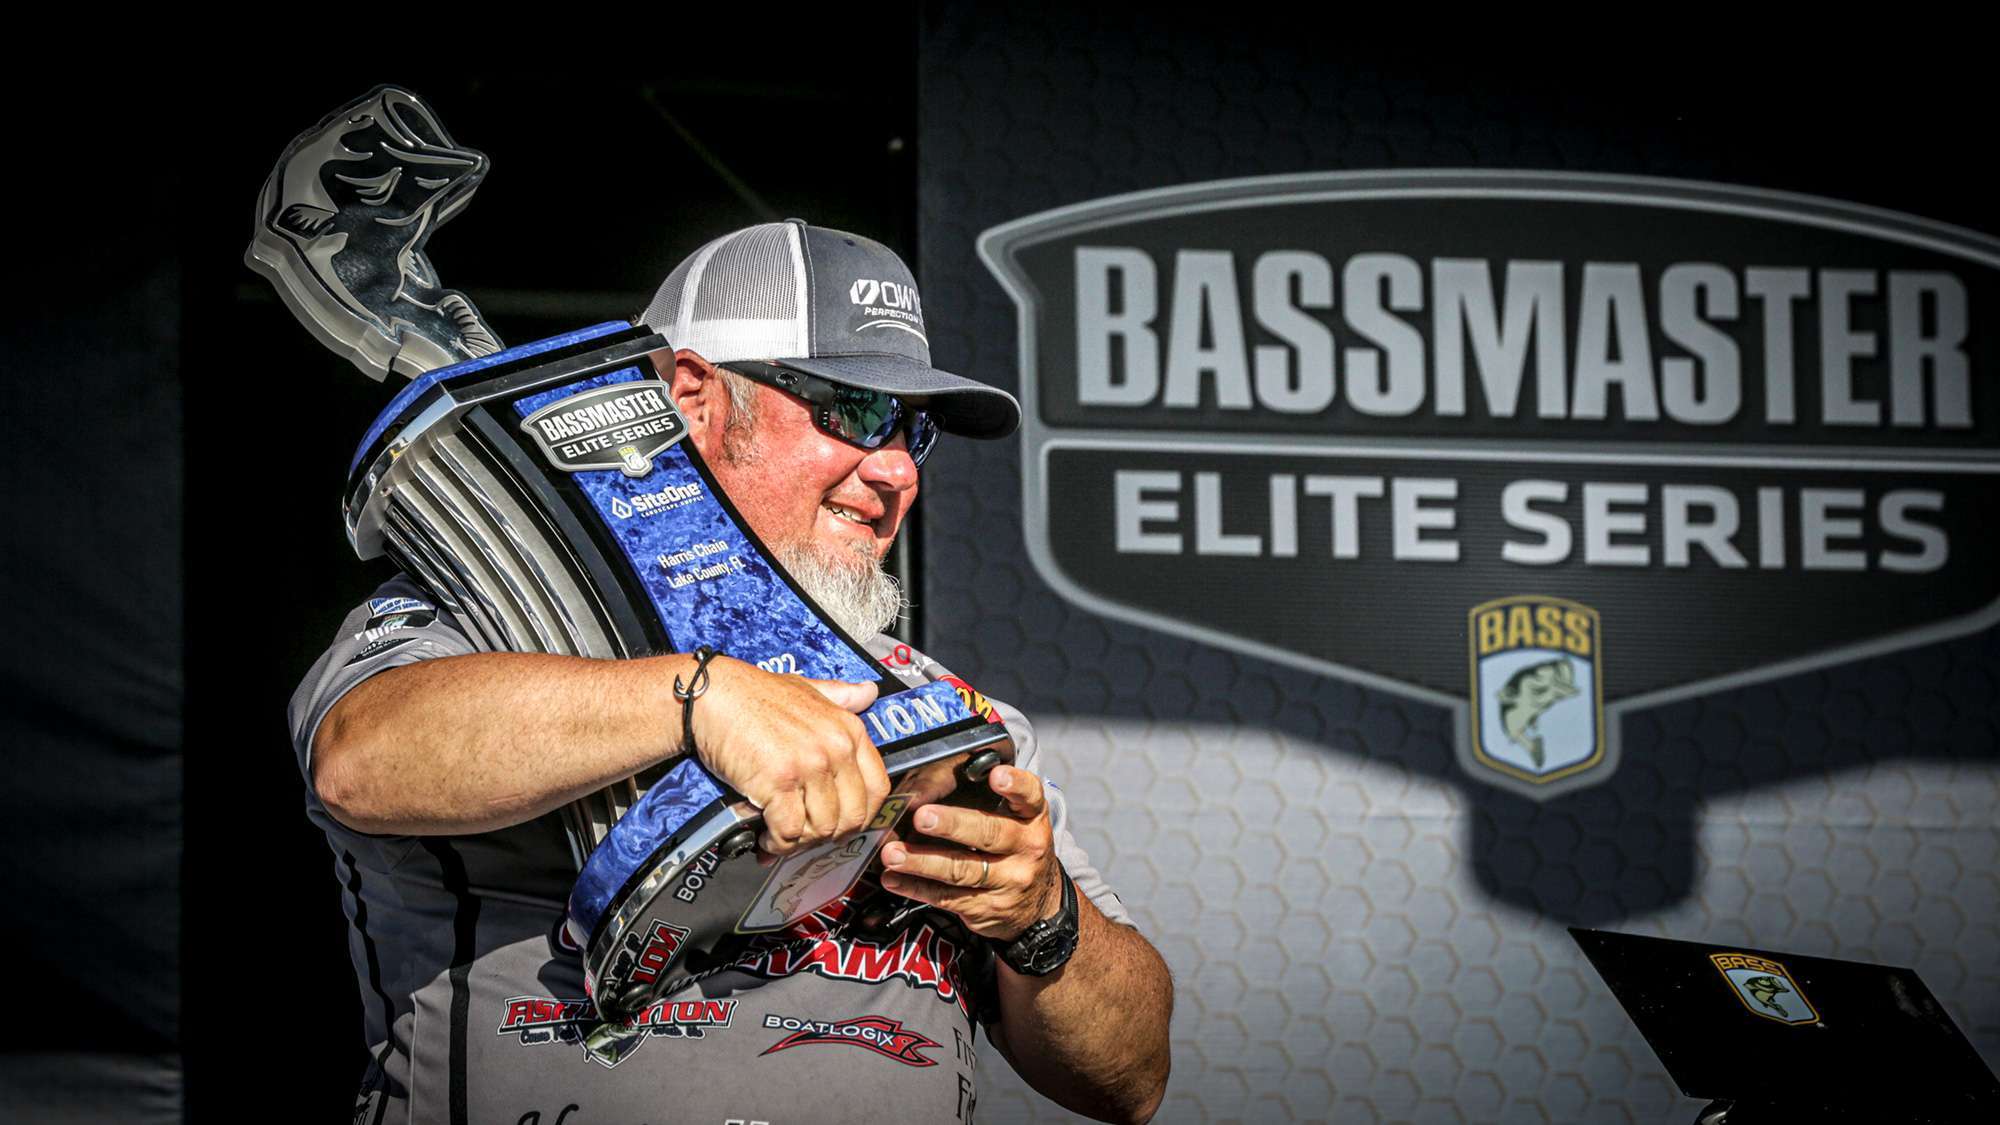 For the second time in two years, Gross earned the coveted blue trophy, winning the tournament with a four-day total of 77 pounds, 11 ounces.  